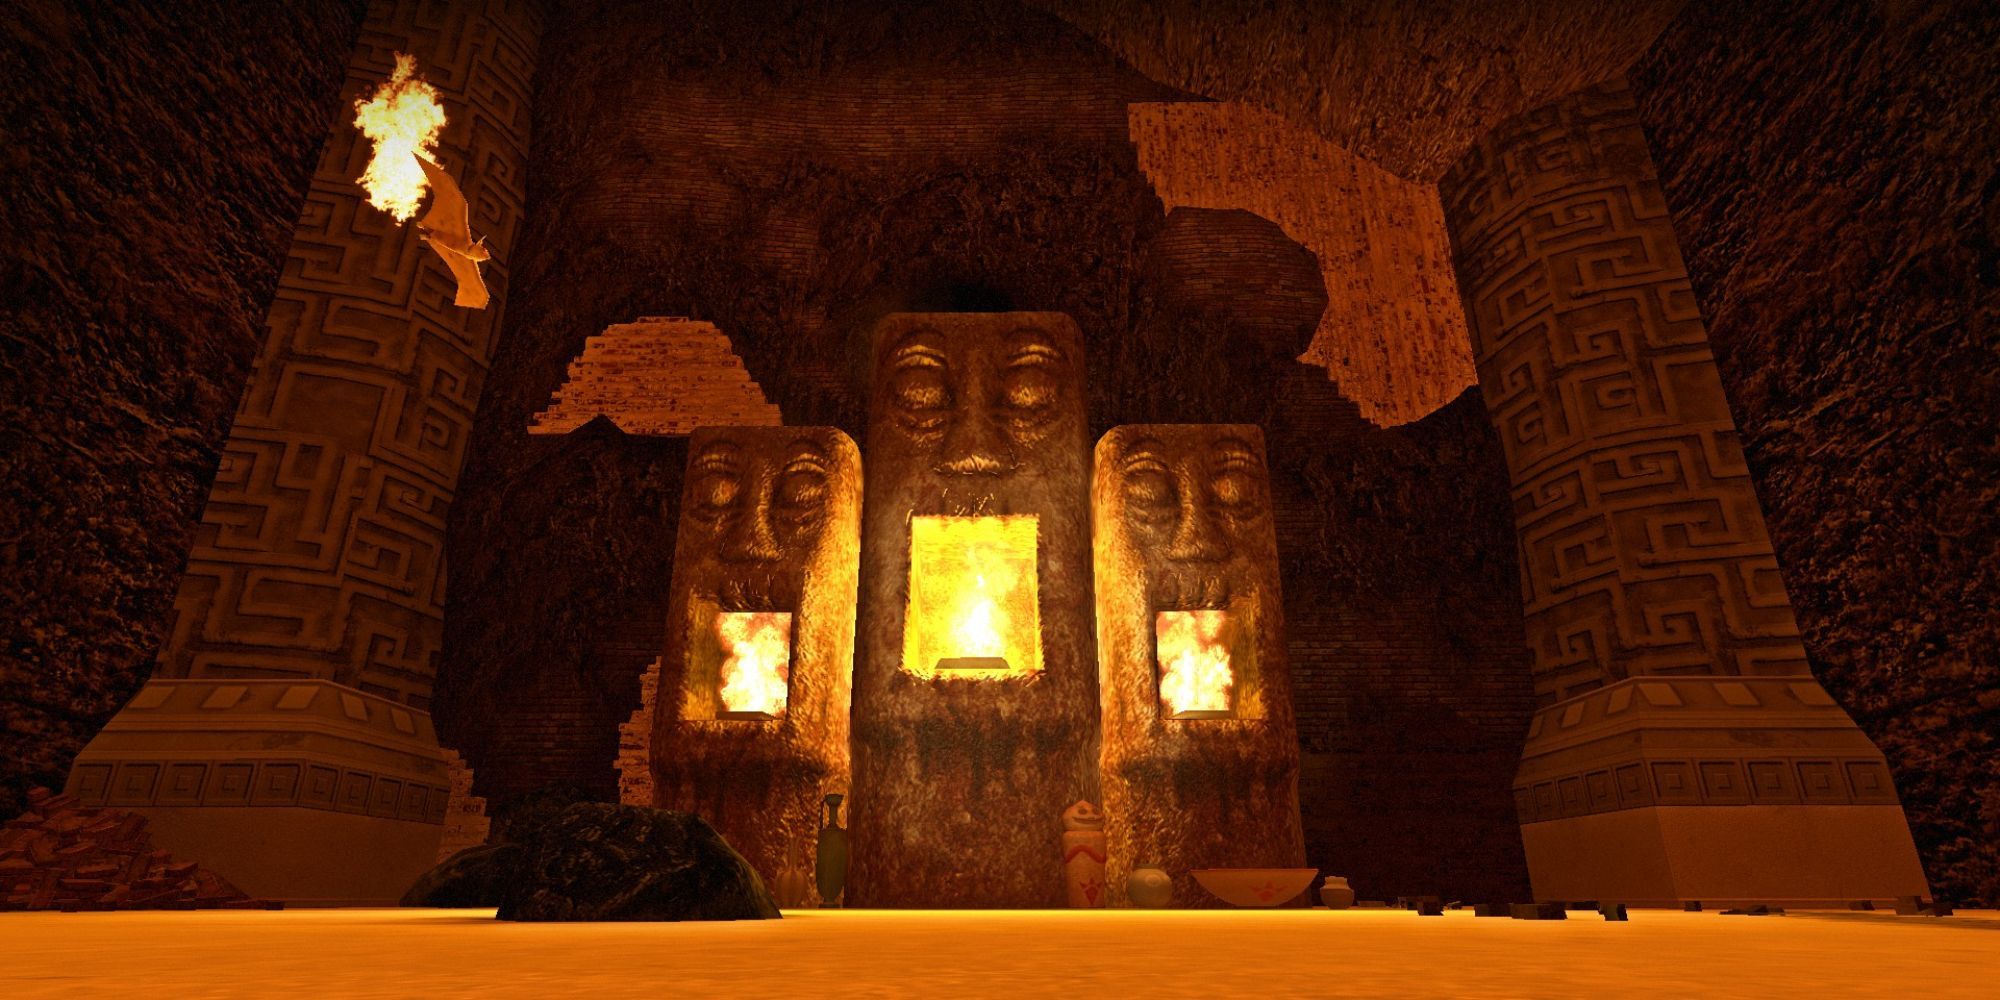 fire flows within the mouths of large head statues, while lava fills the floor in a cave